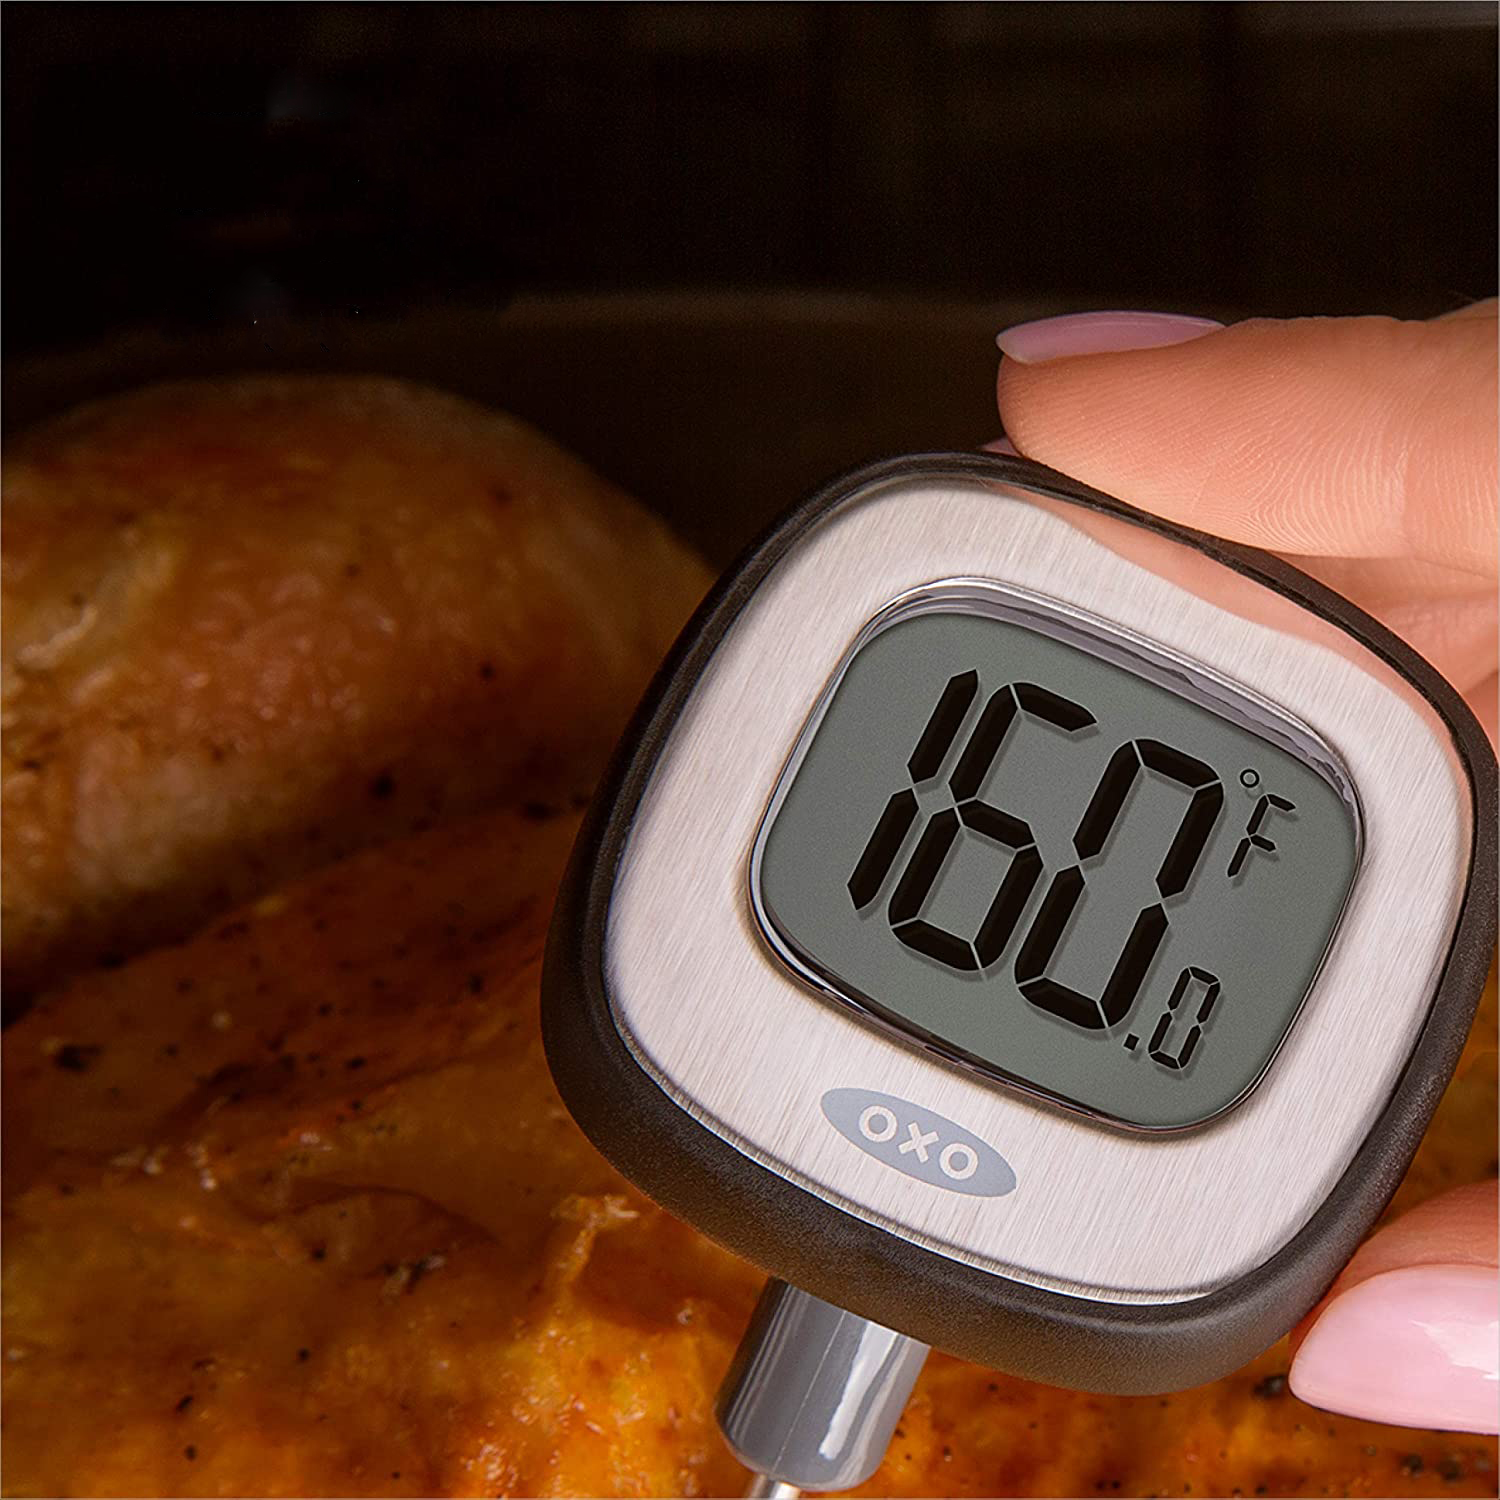 digital meat thermometer showing 160 degrees